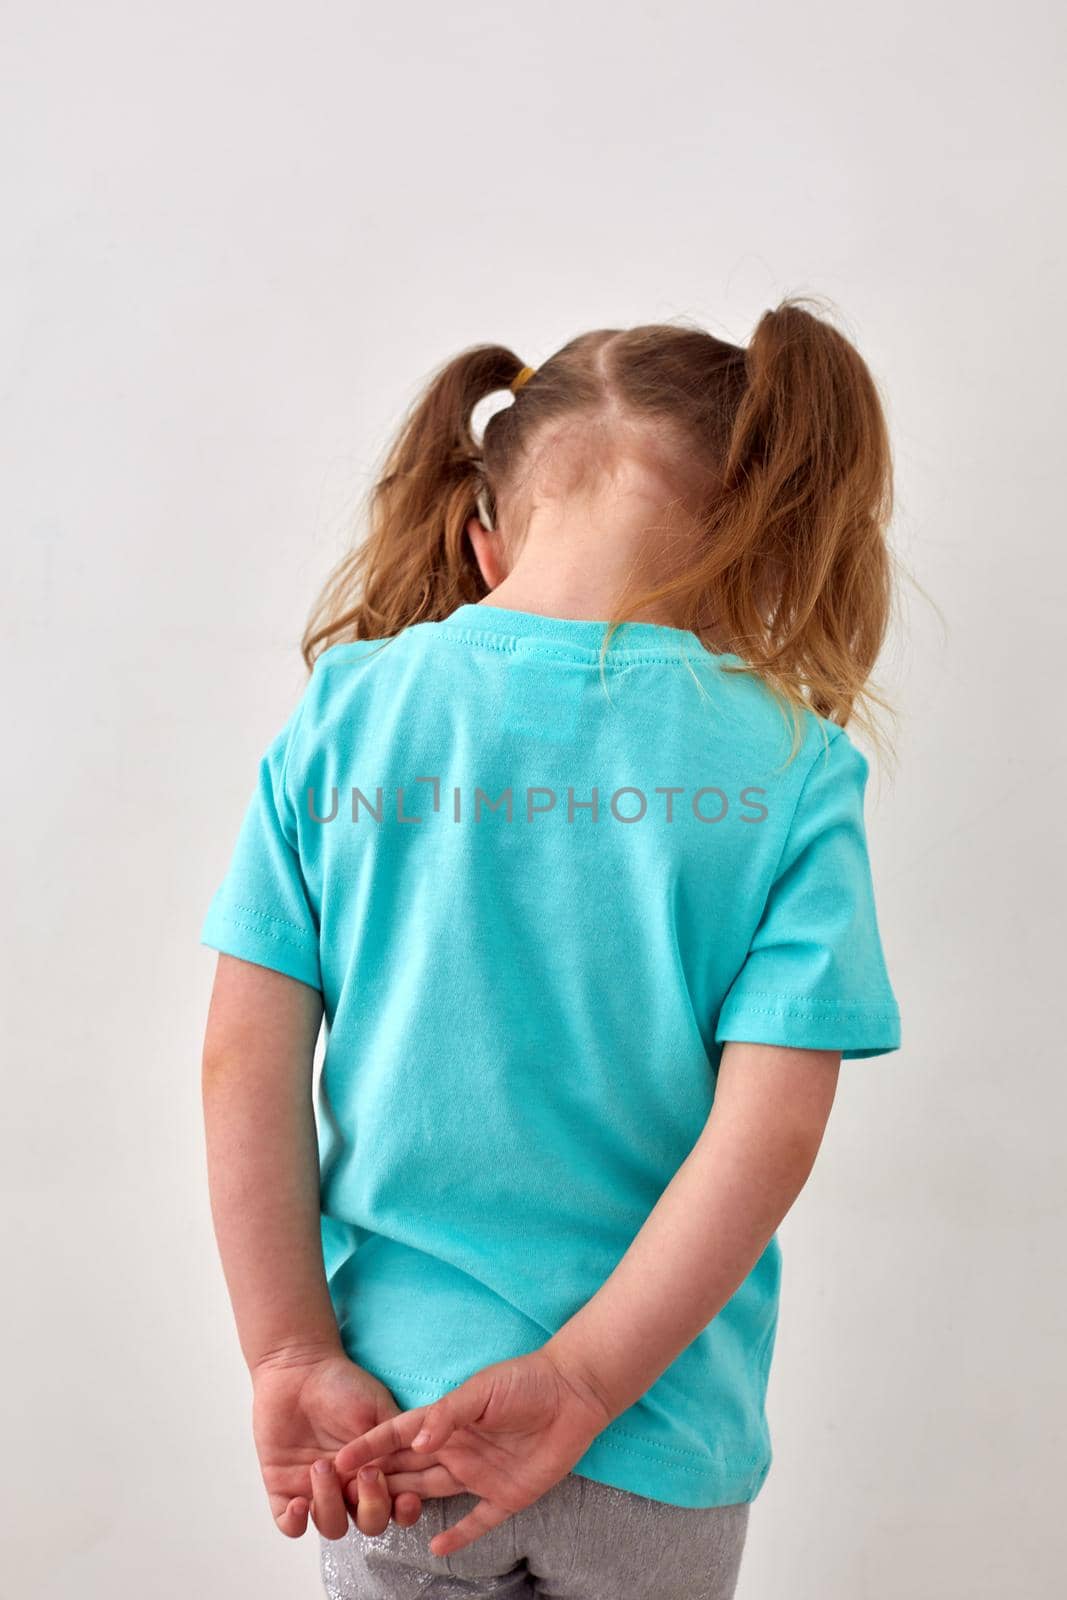 Back view of unrecognizable upset little girl with ponytails dressed in blue t shirt standing against white wall